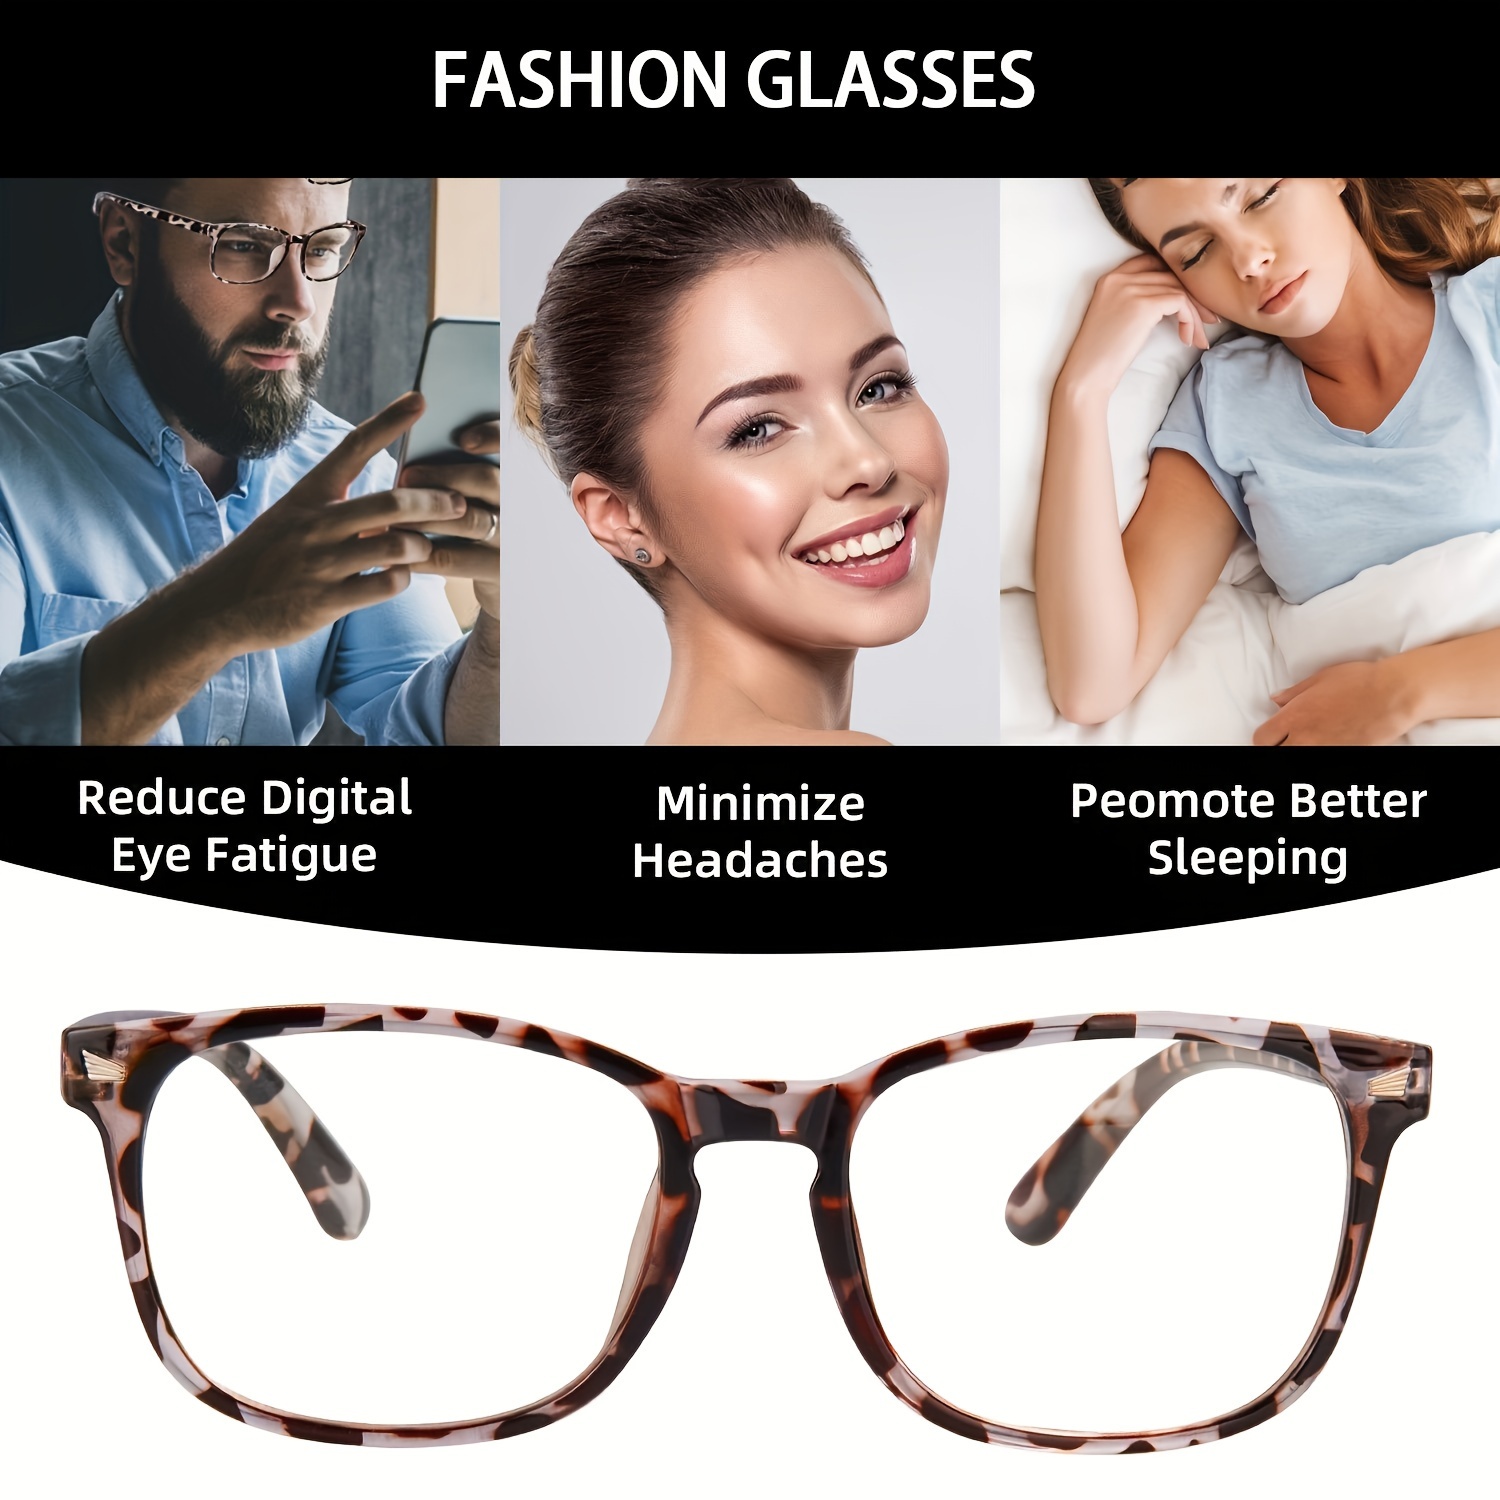 5pcs Anti-Eyestrain Blue Light Blocking Glasses for Men and Women - Perfect  for Computer, Gaming, TV, and Phone Use - UV Glare Protection Included